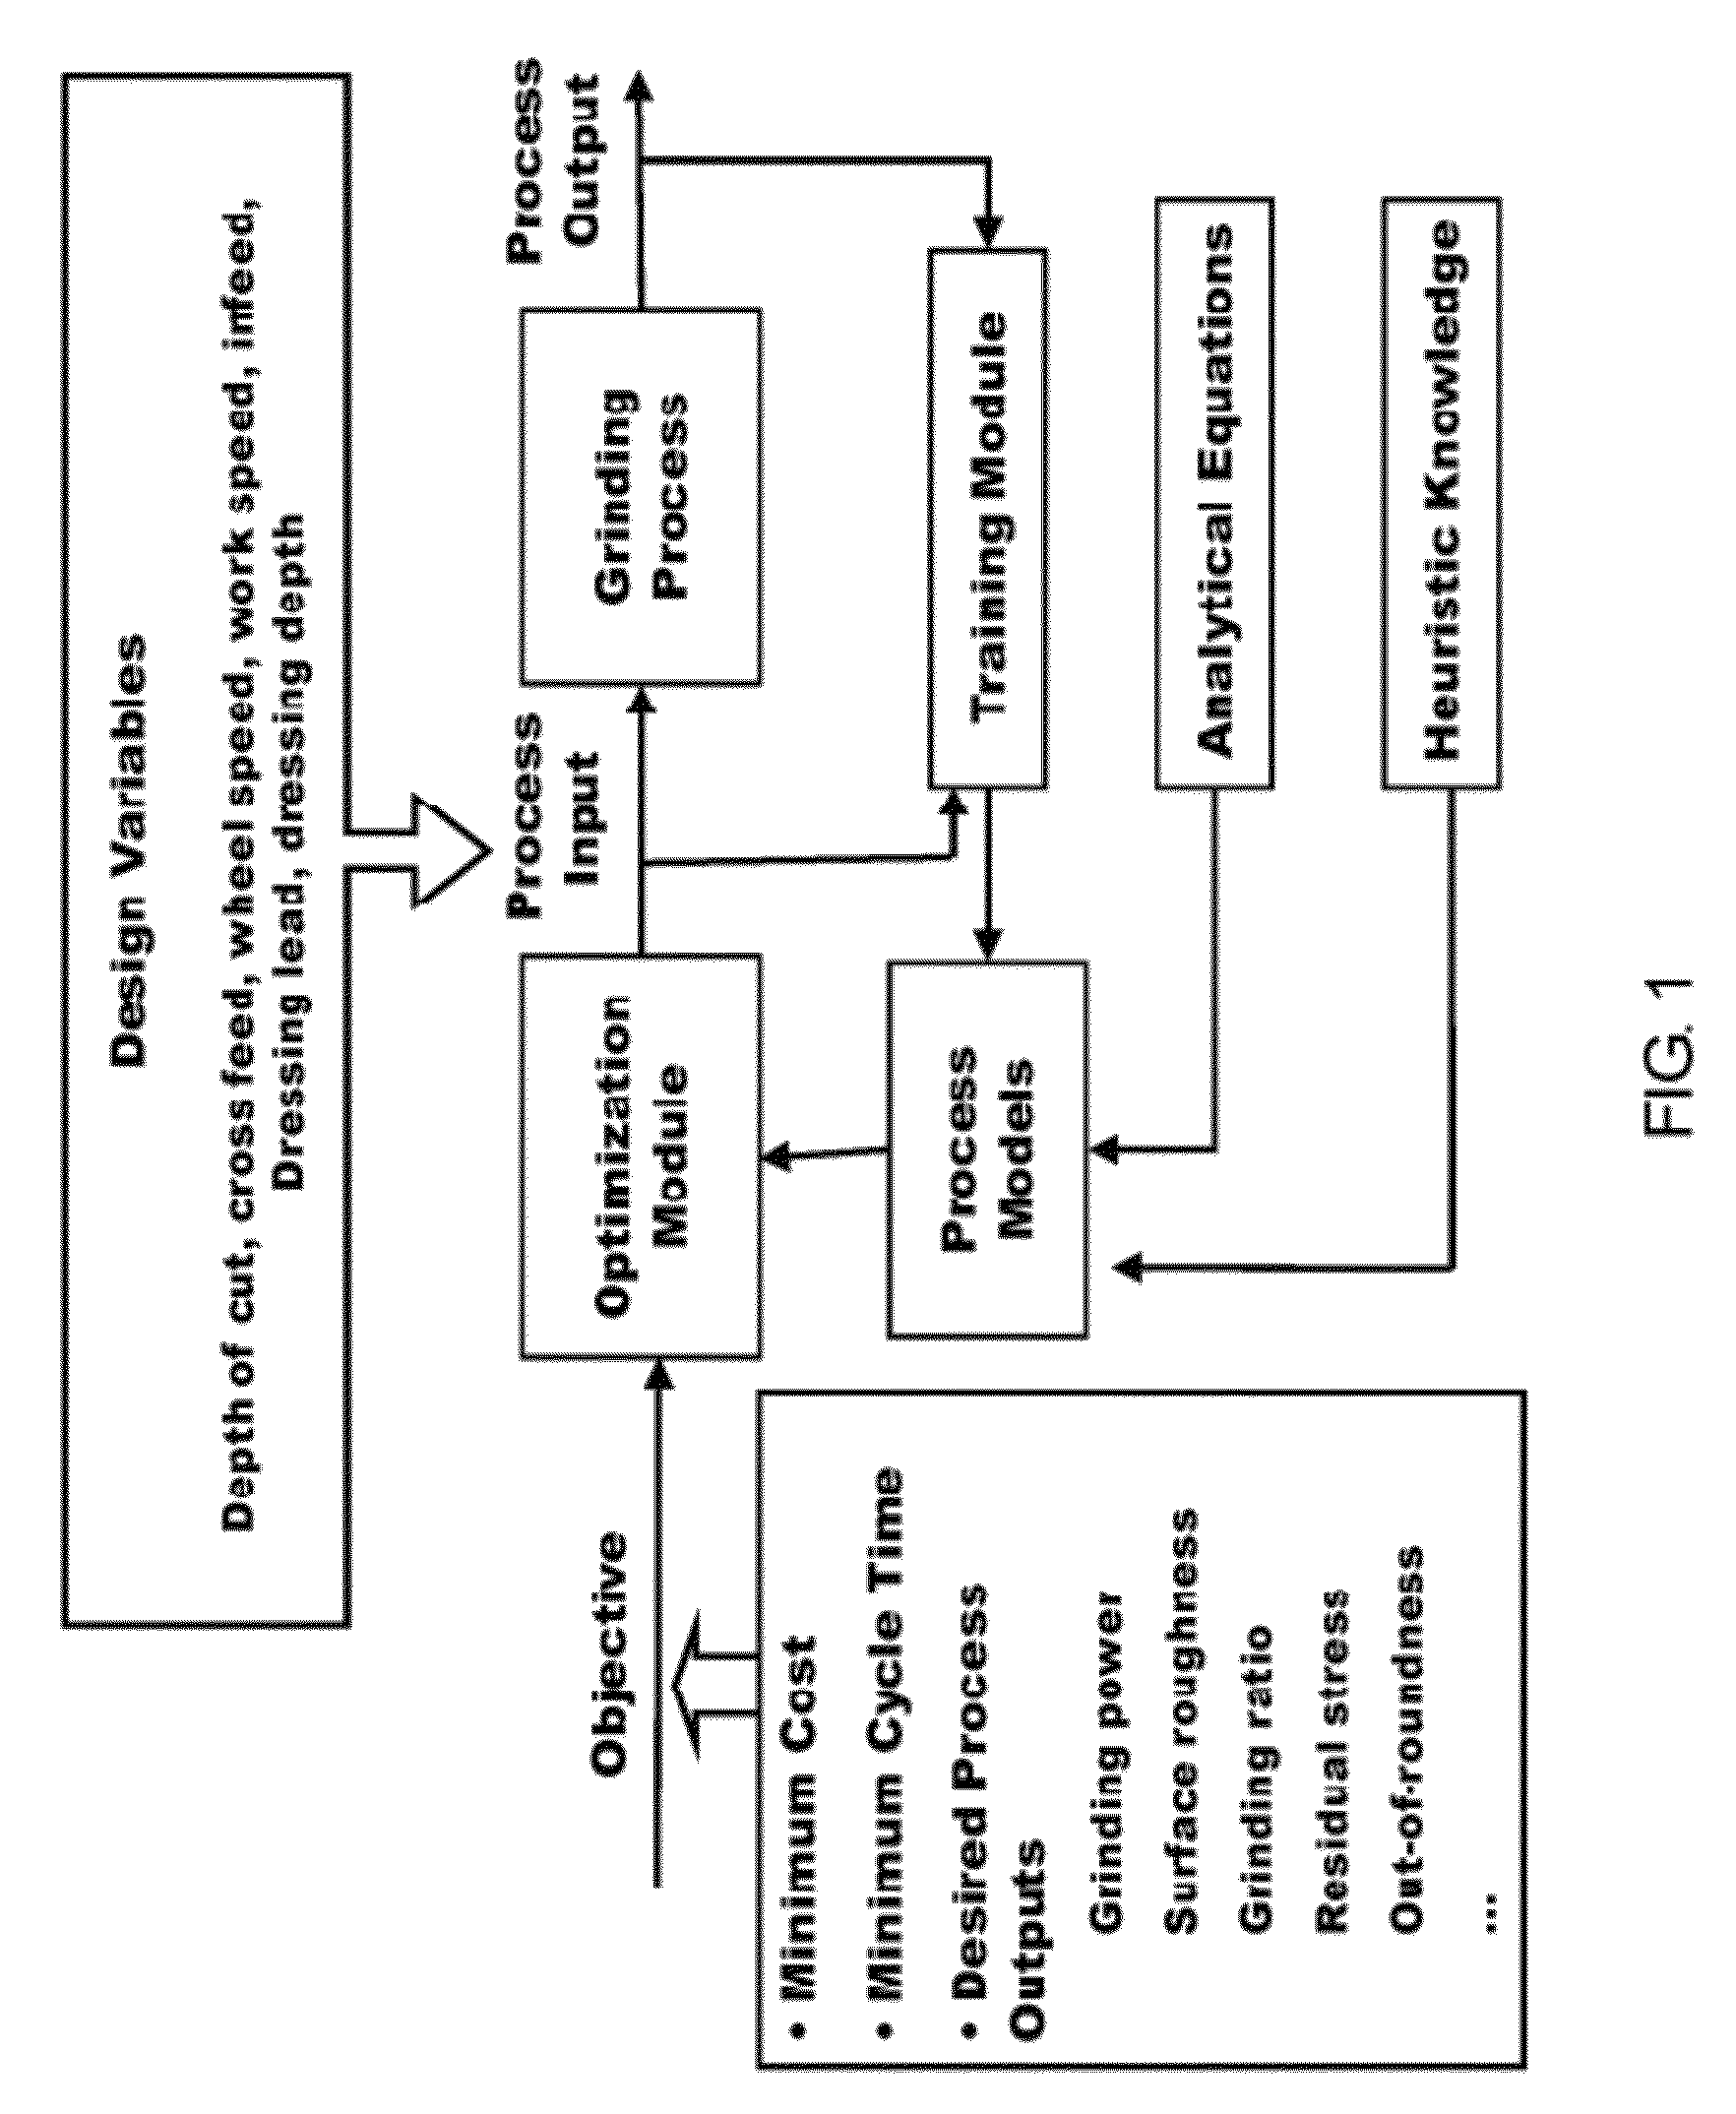 Intelligent optimization method and system therefor